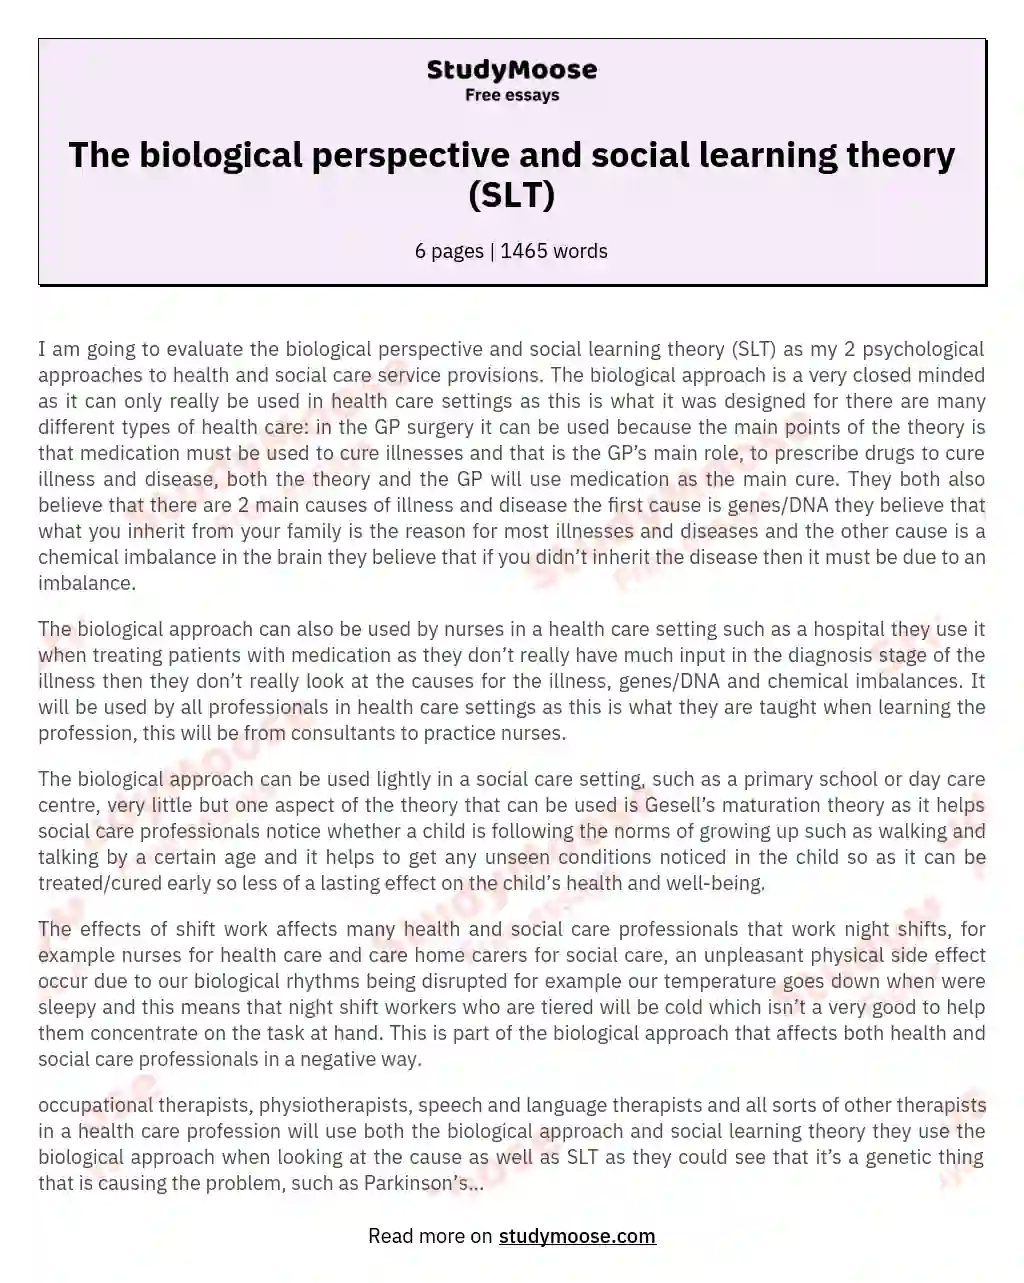 The biological perspective and social learning theory (SLT) essay